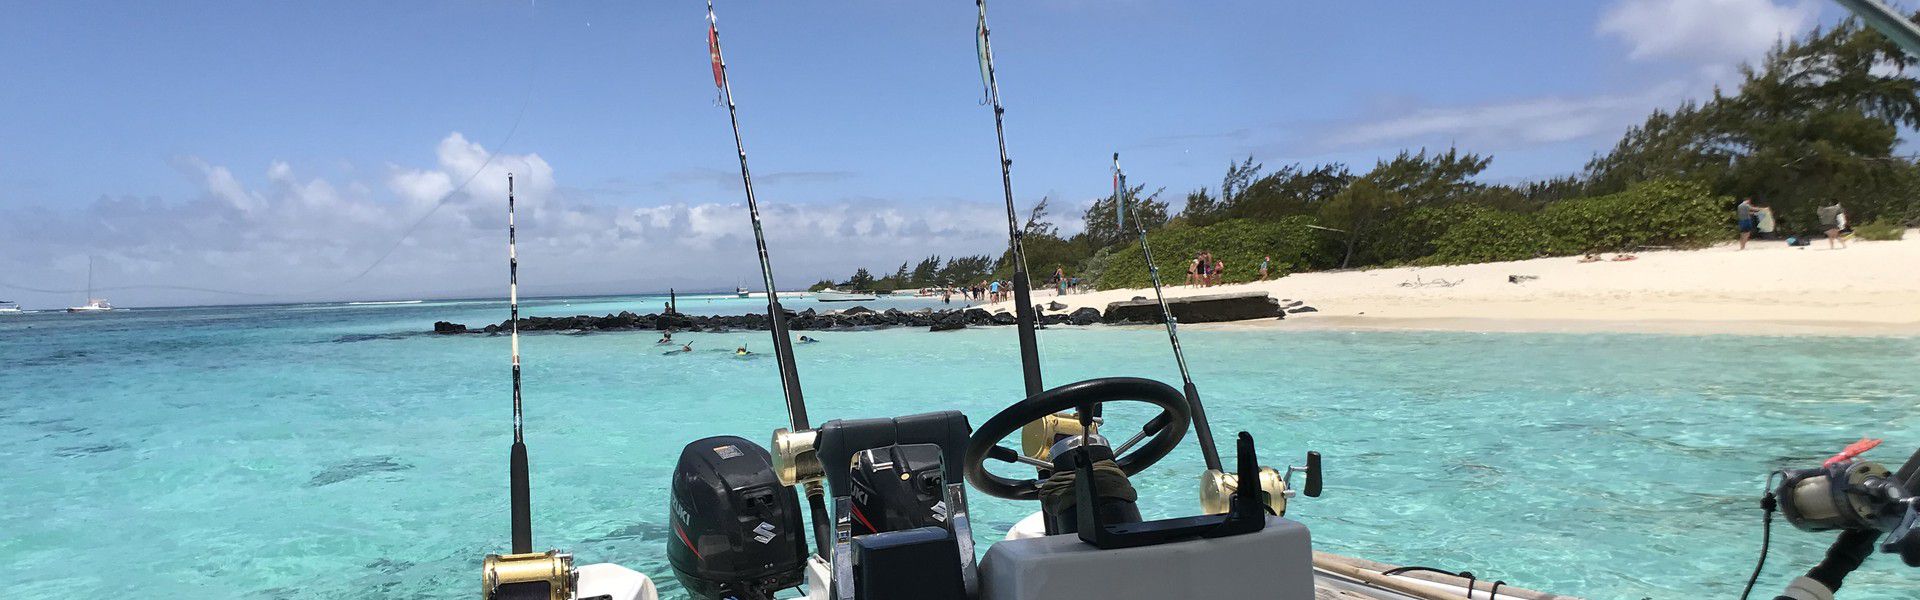 Deep-sea fishing is an activity full of emotions, twists and turns and unforgettable moments. In Mauritius it is a very popular tourist activity. You will be accompanied by a deep-sea fishing specialist to find the catch of your dreams. With an unmatched adrenaline rush; this is a sport of passion.